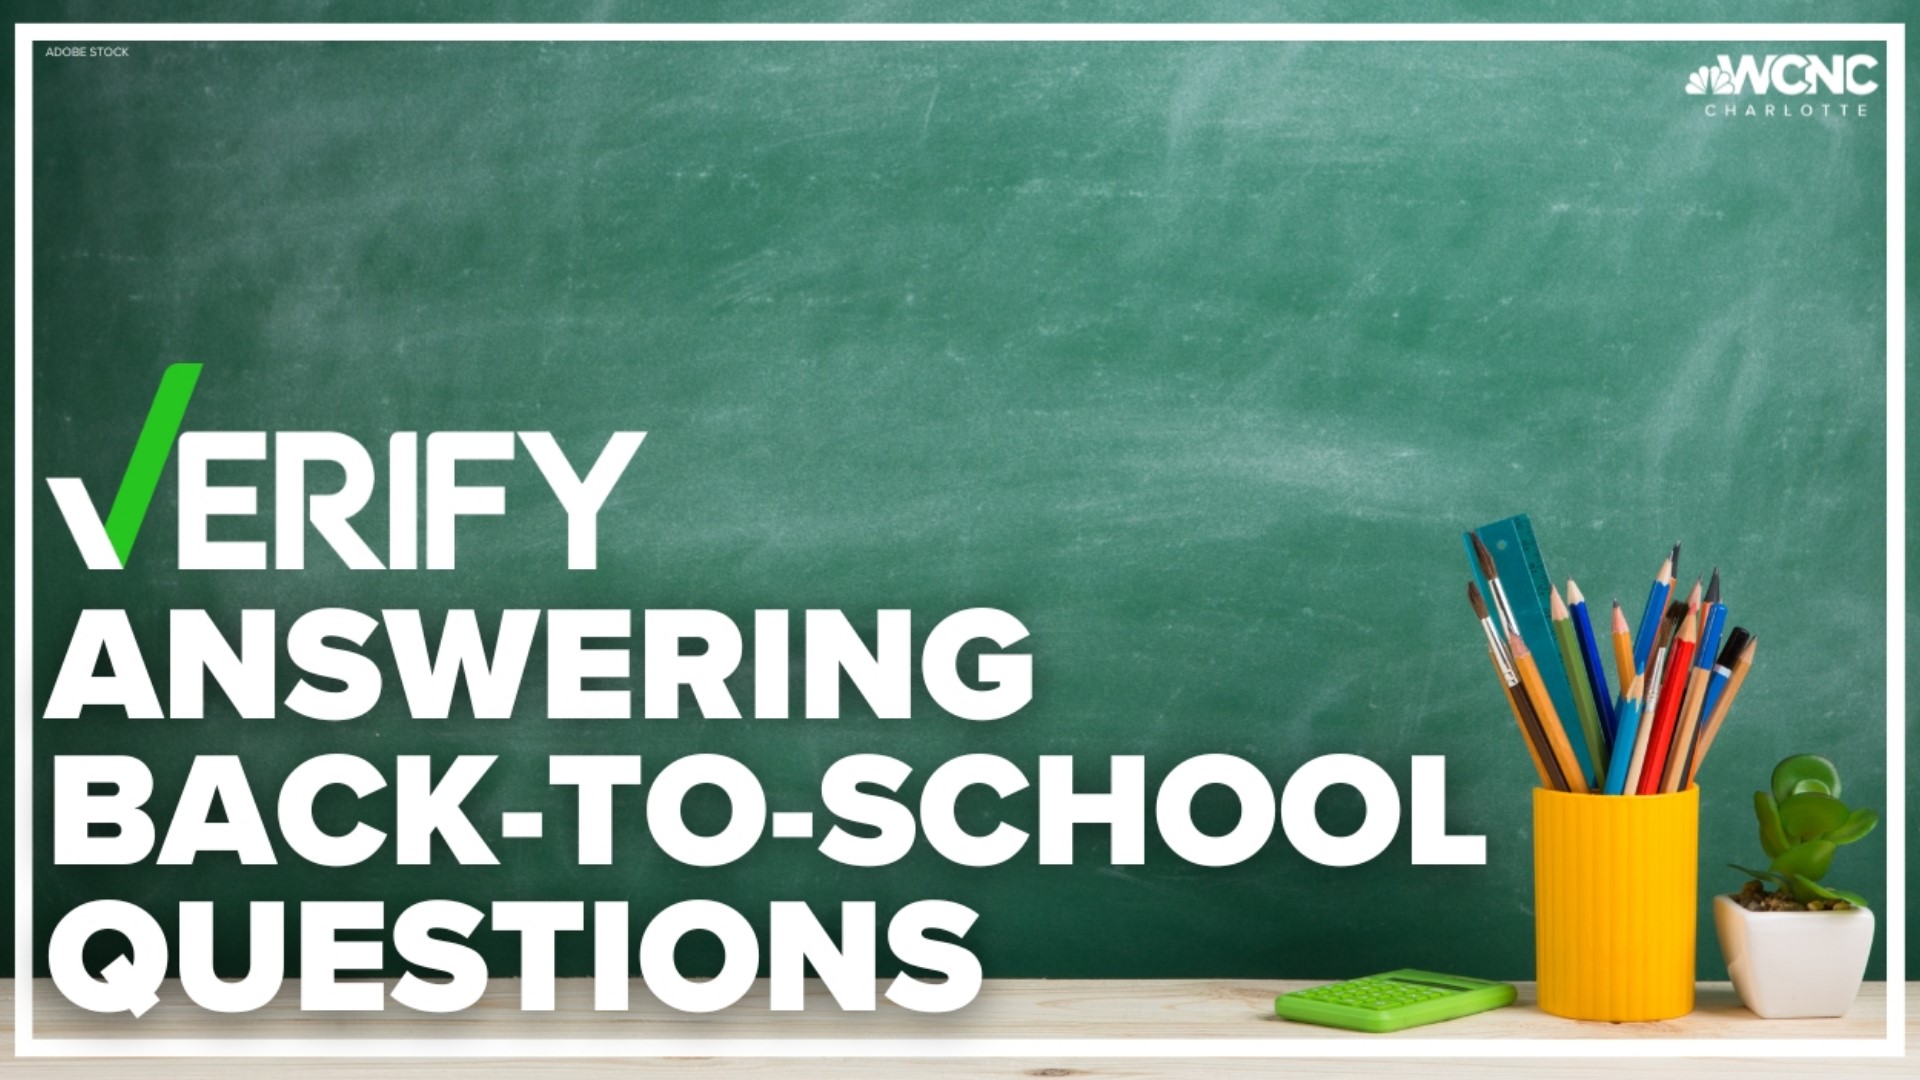 Our Verify team has three facts you need to know before sending your kid back to the classroom.